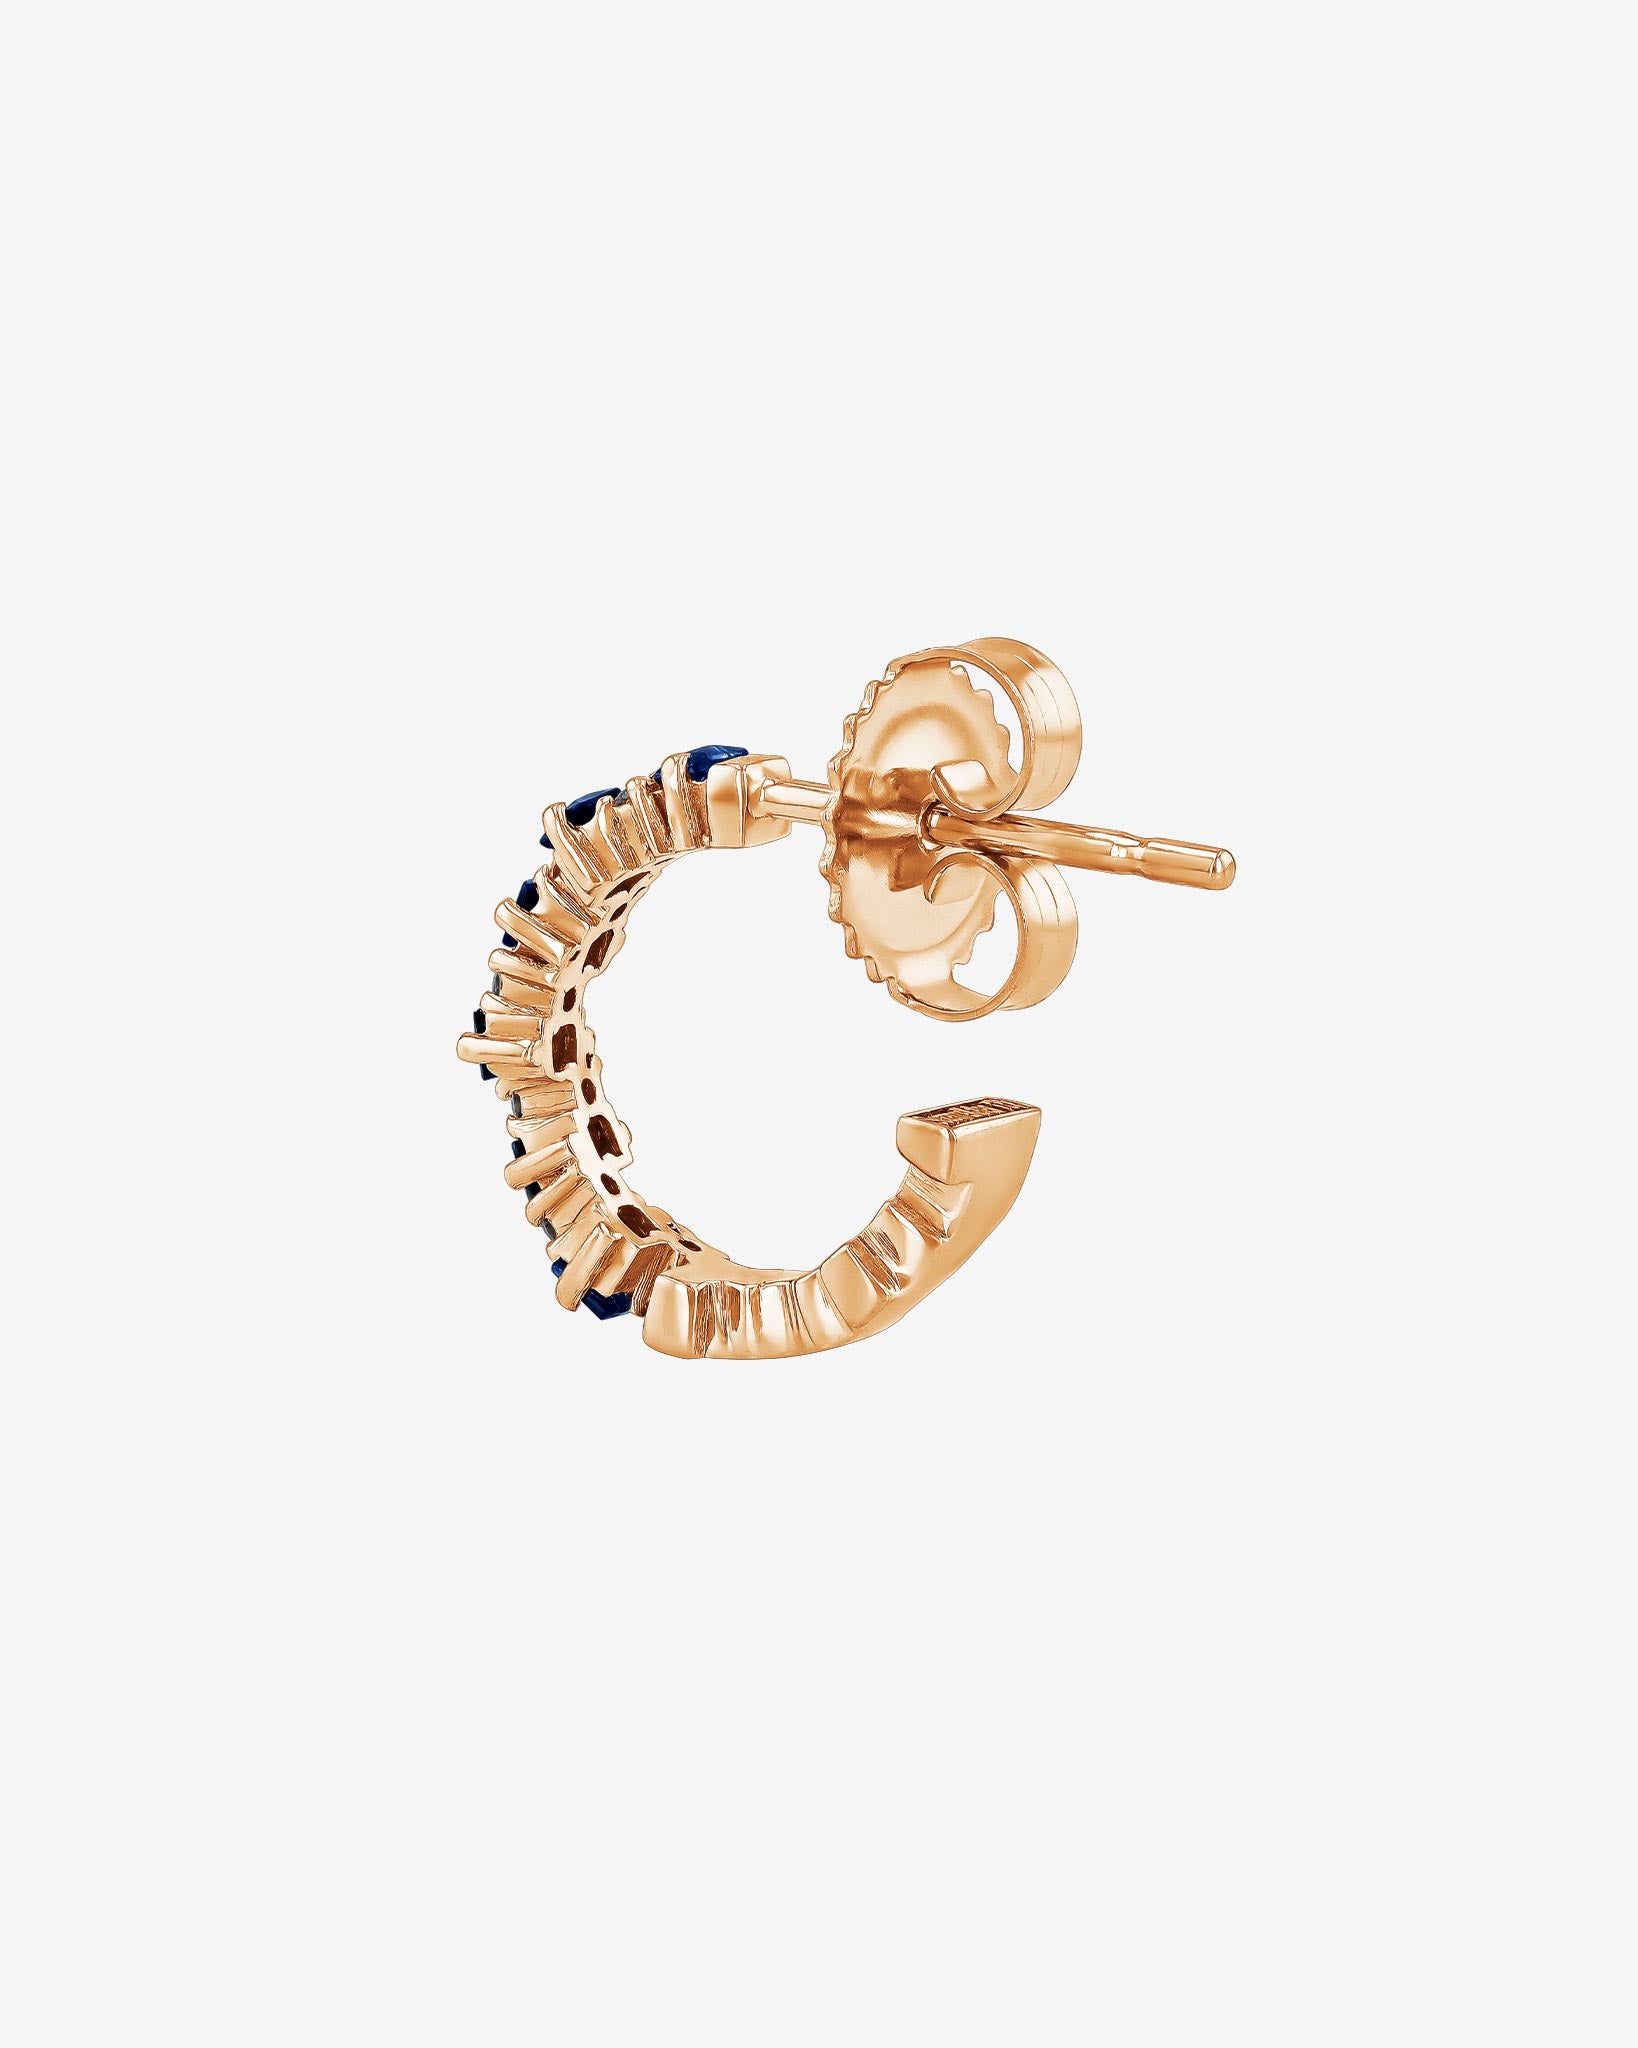 Suzanne Kalan Princess Staggered Dark Blue Sapphire Mini Hoops in 18k rose gold